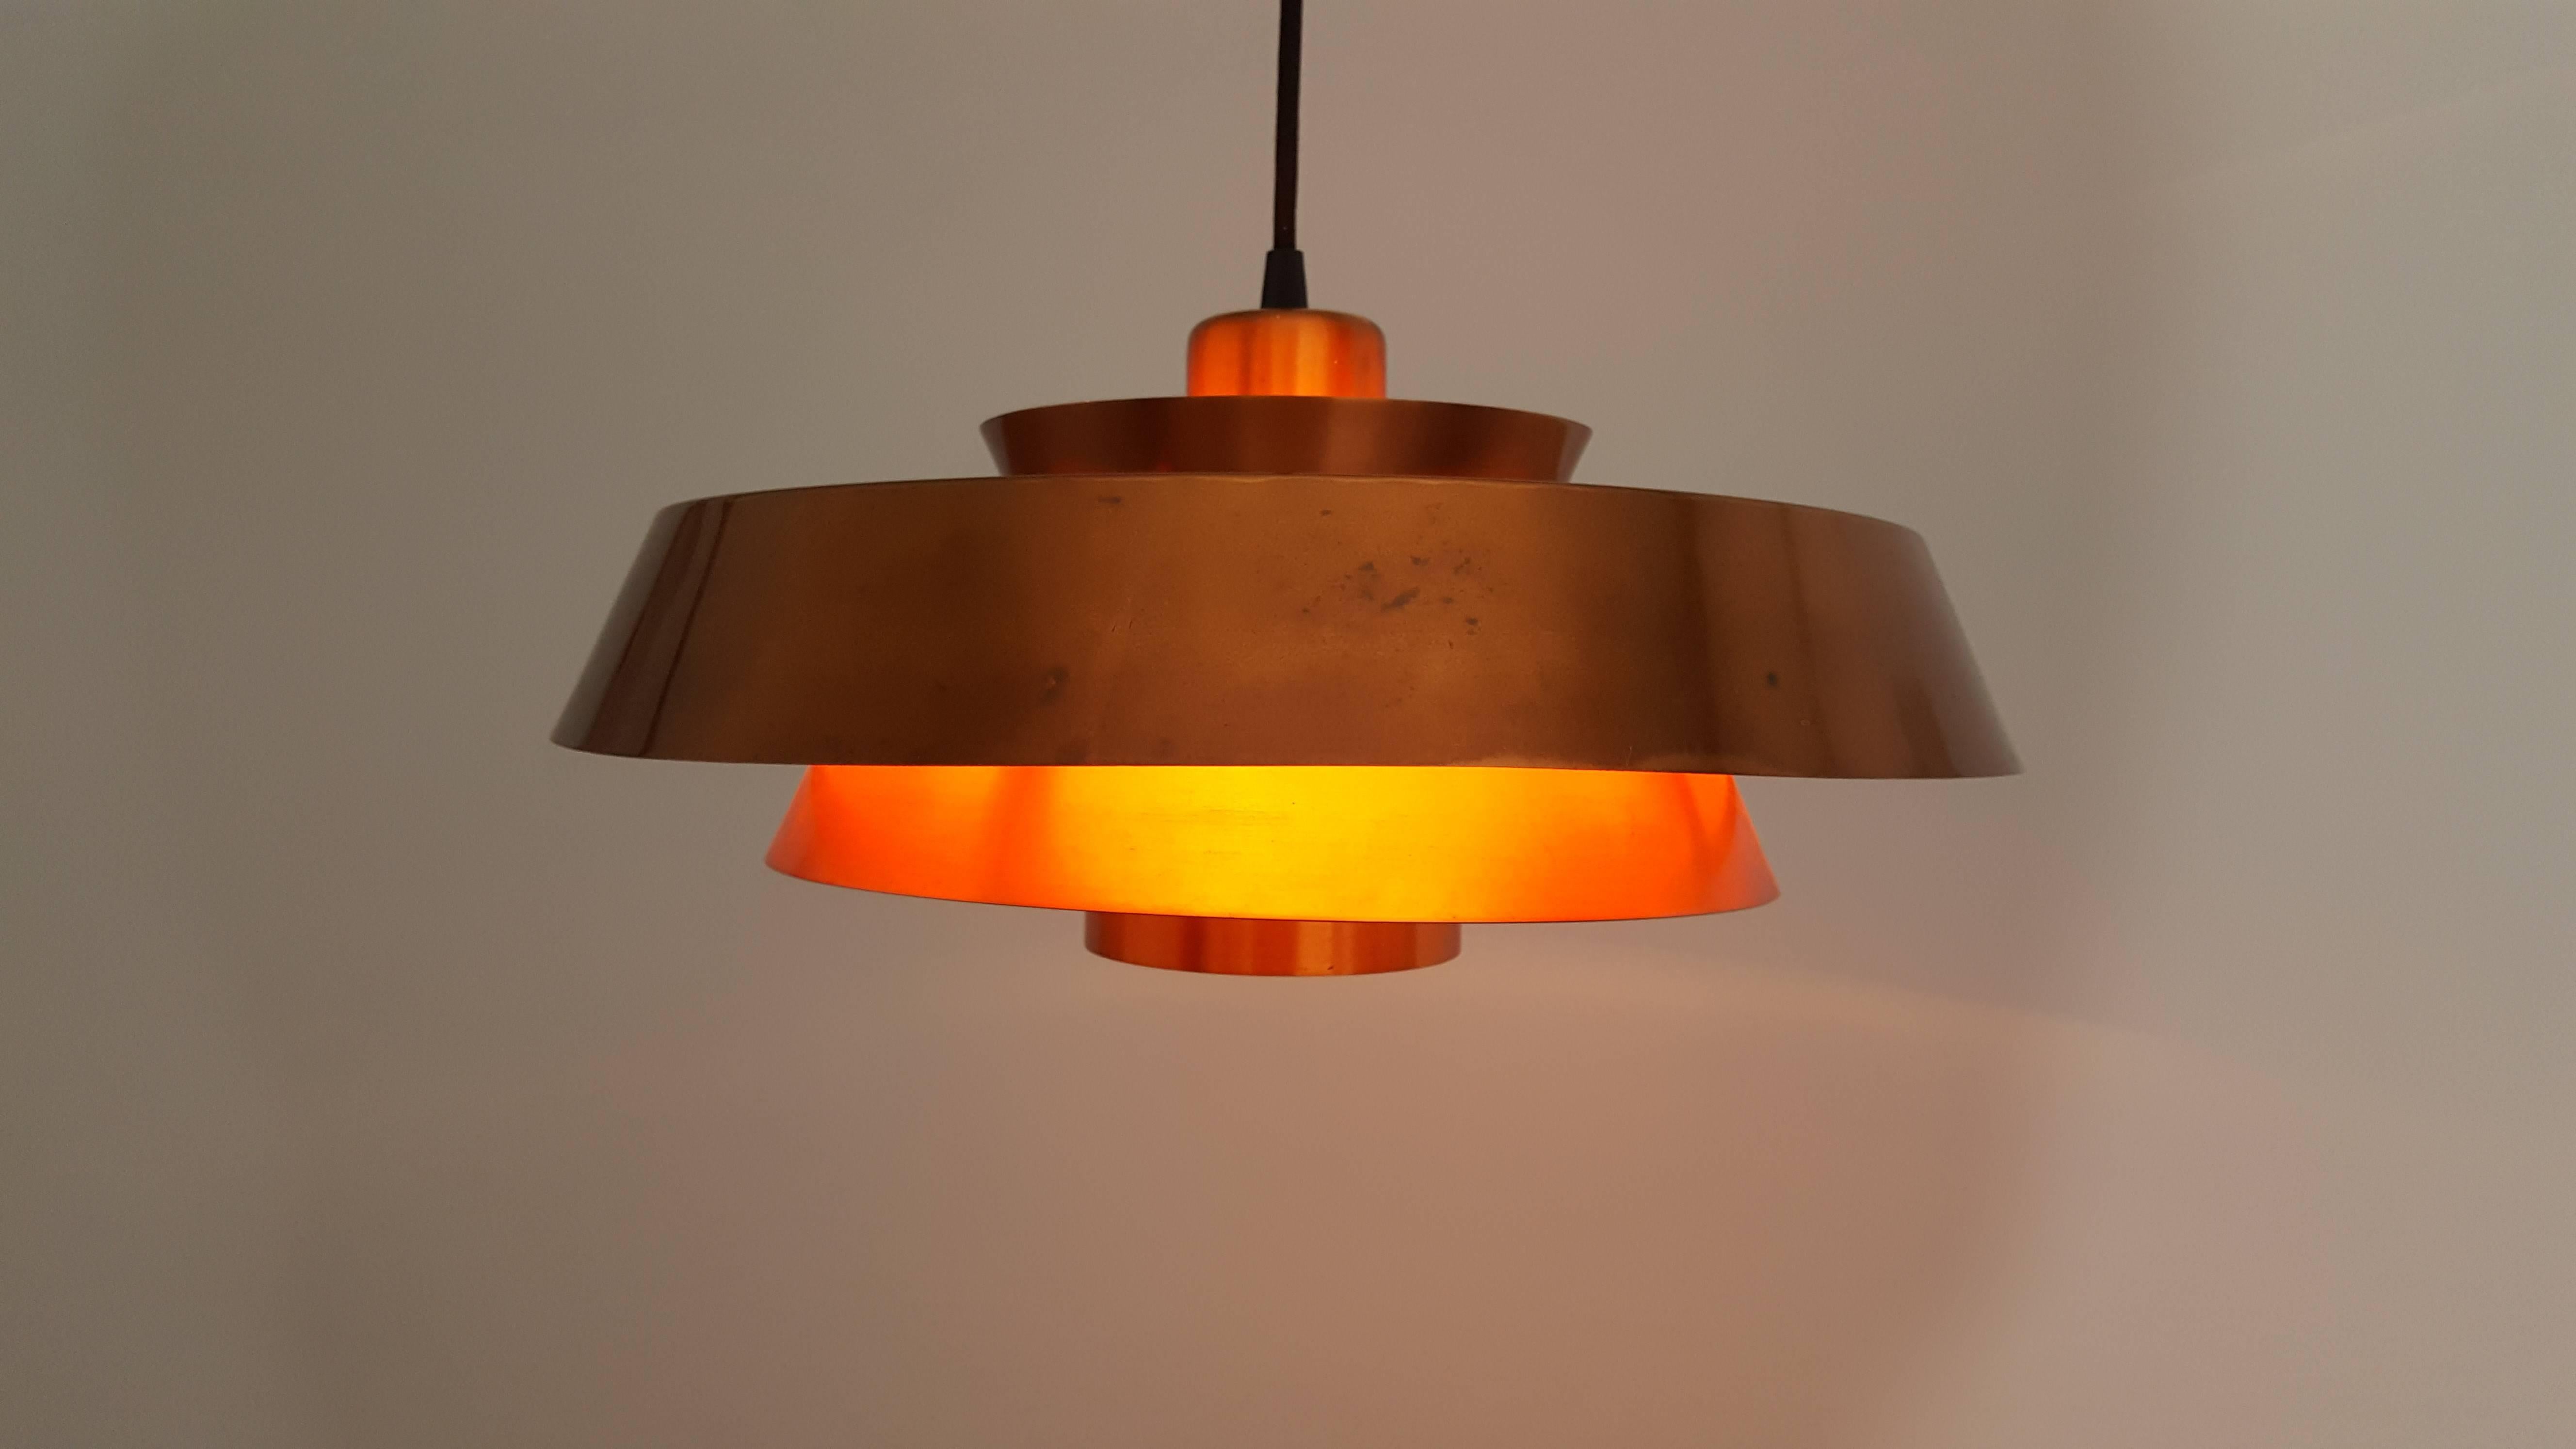 Jo Hammerborg Nova pendant light in copper for Fog & Mørup Denmark, 1960s

This vintage, modernist light fixture is crafted in copper in three round, graduated tiers

In 1957 Jo Hammerborg became head of design at Fog & Mørup. His incumbency in